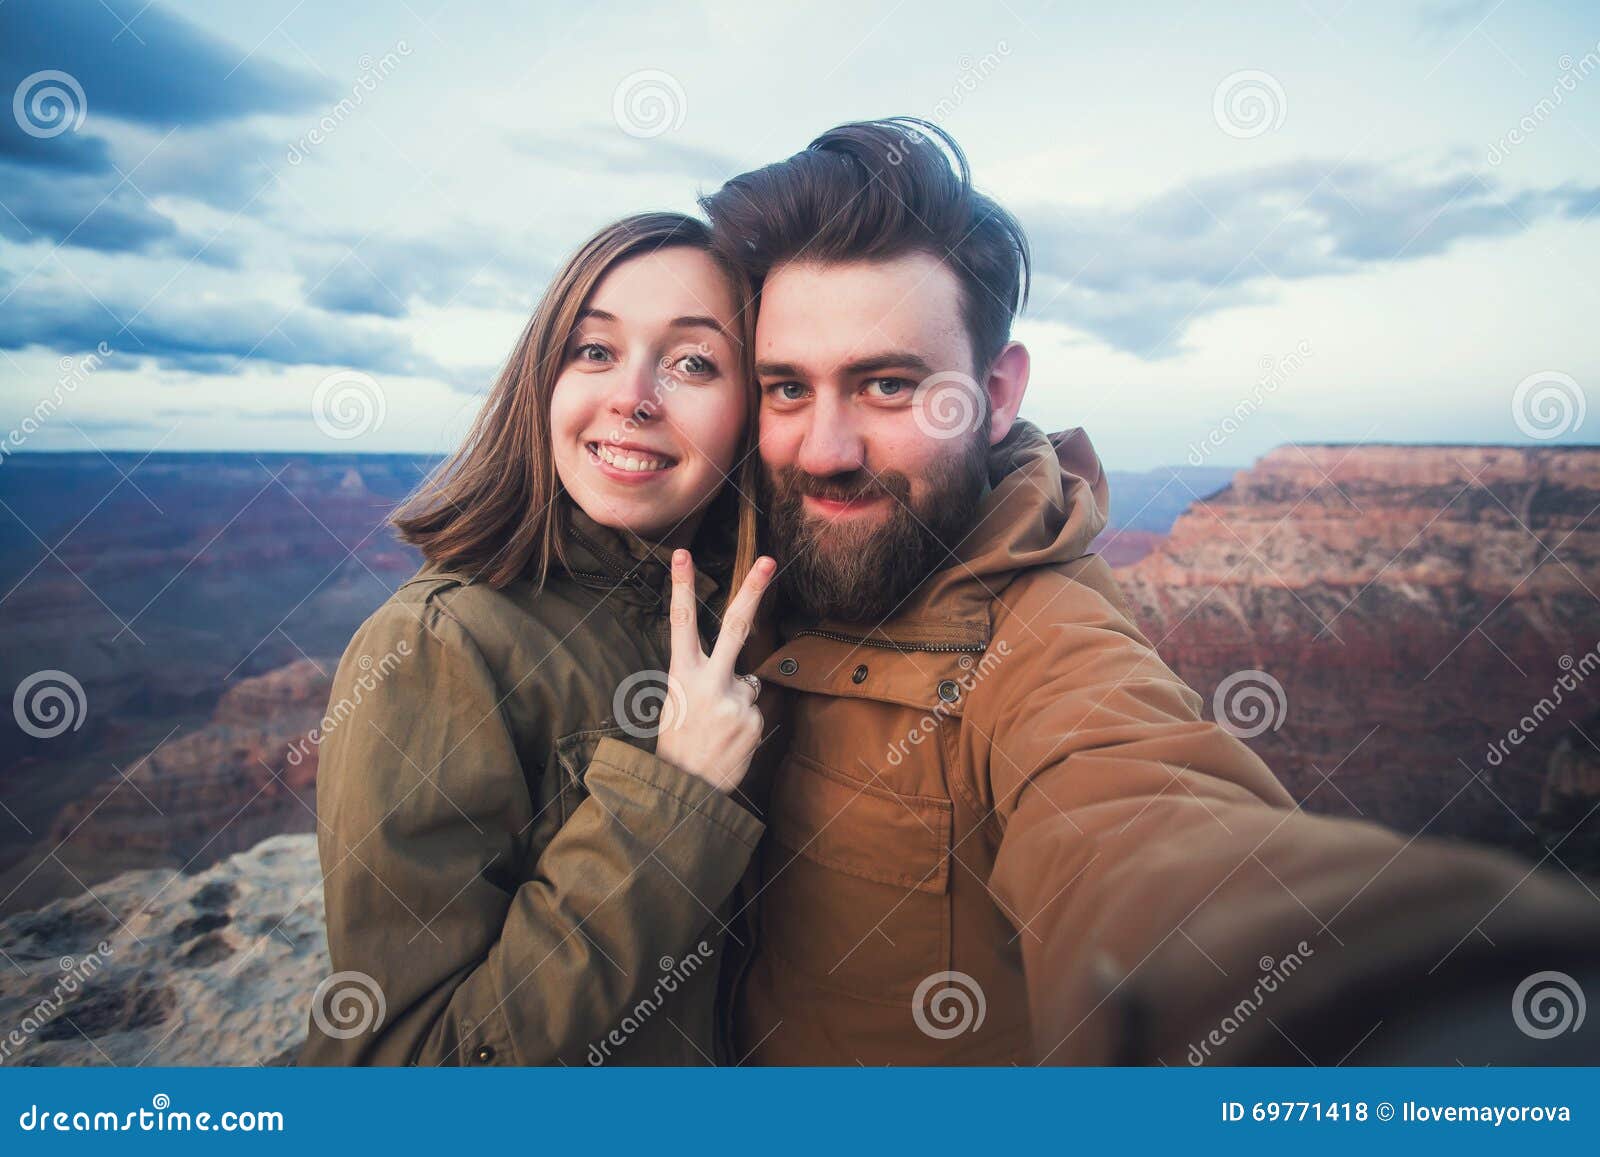 324 Indian Couple Taking Selfie Stock Video Footage - 4K and HD Video Clips  | Shutterstock